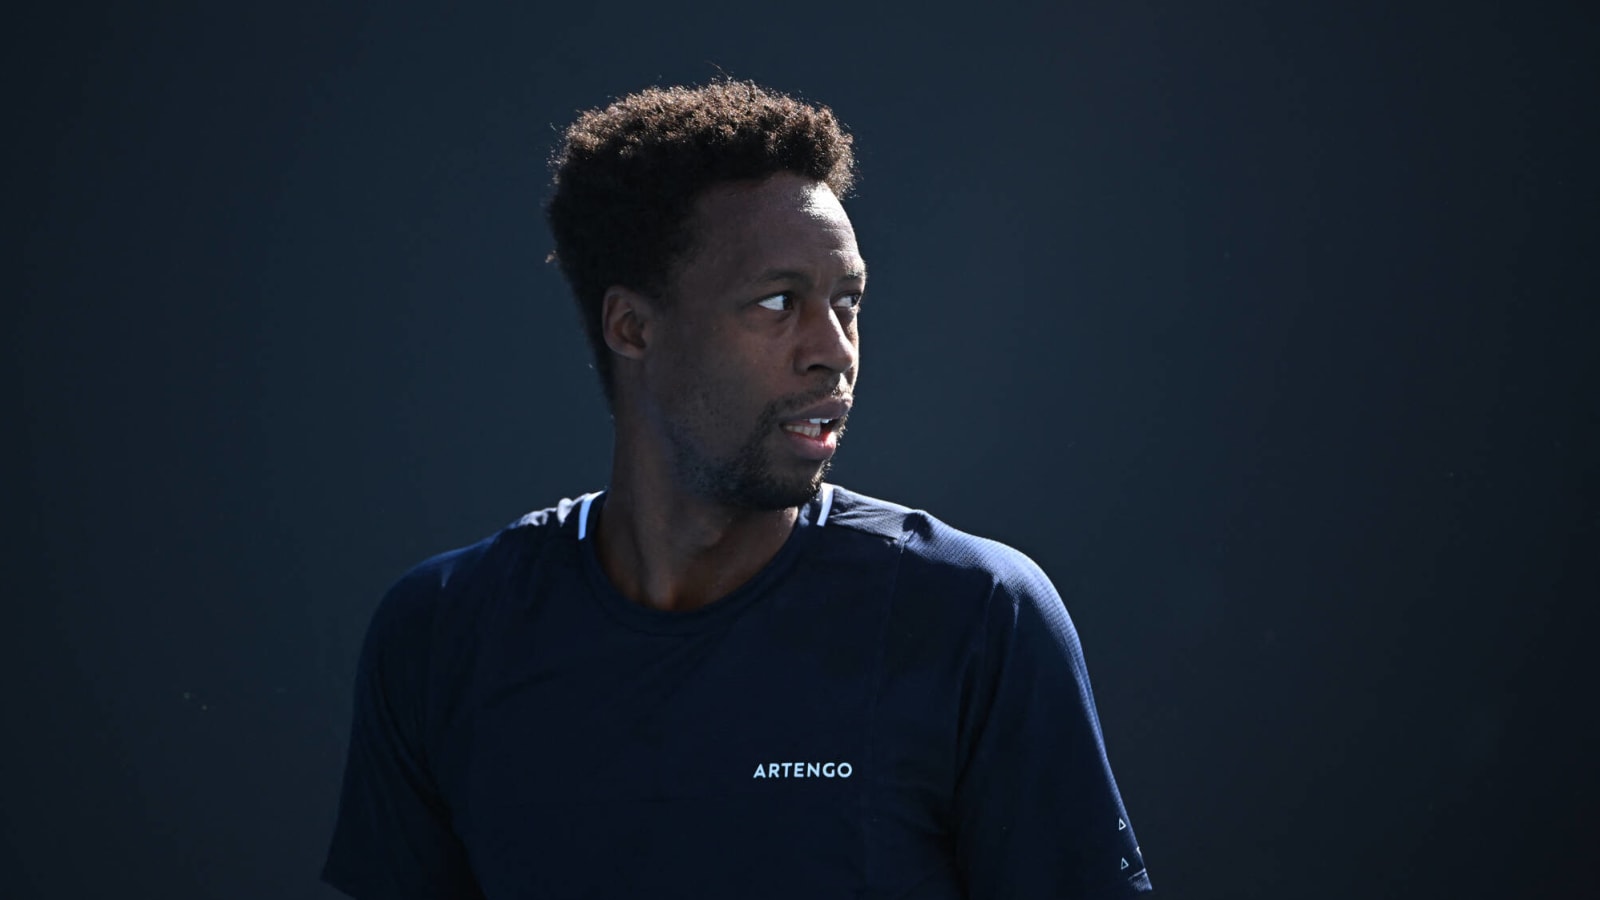 'I don’t have many tournaments left,' Reality-check hits home as Gael Monfils strives to become the ultimate showman, giving the audience exactly what they want